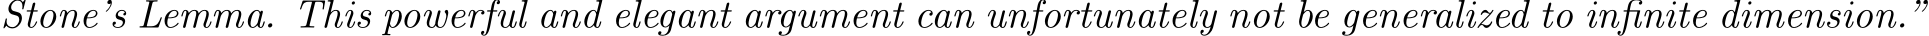 Stone’s Lemma. This powerful and elegant argument can unfortunately not be generalized to infinite dimension.”